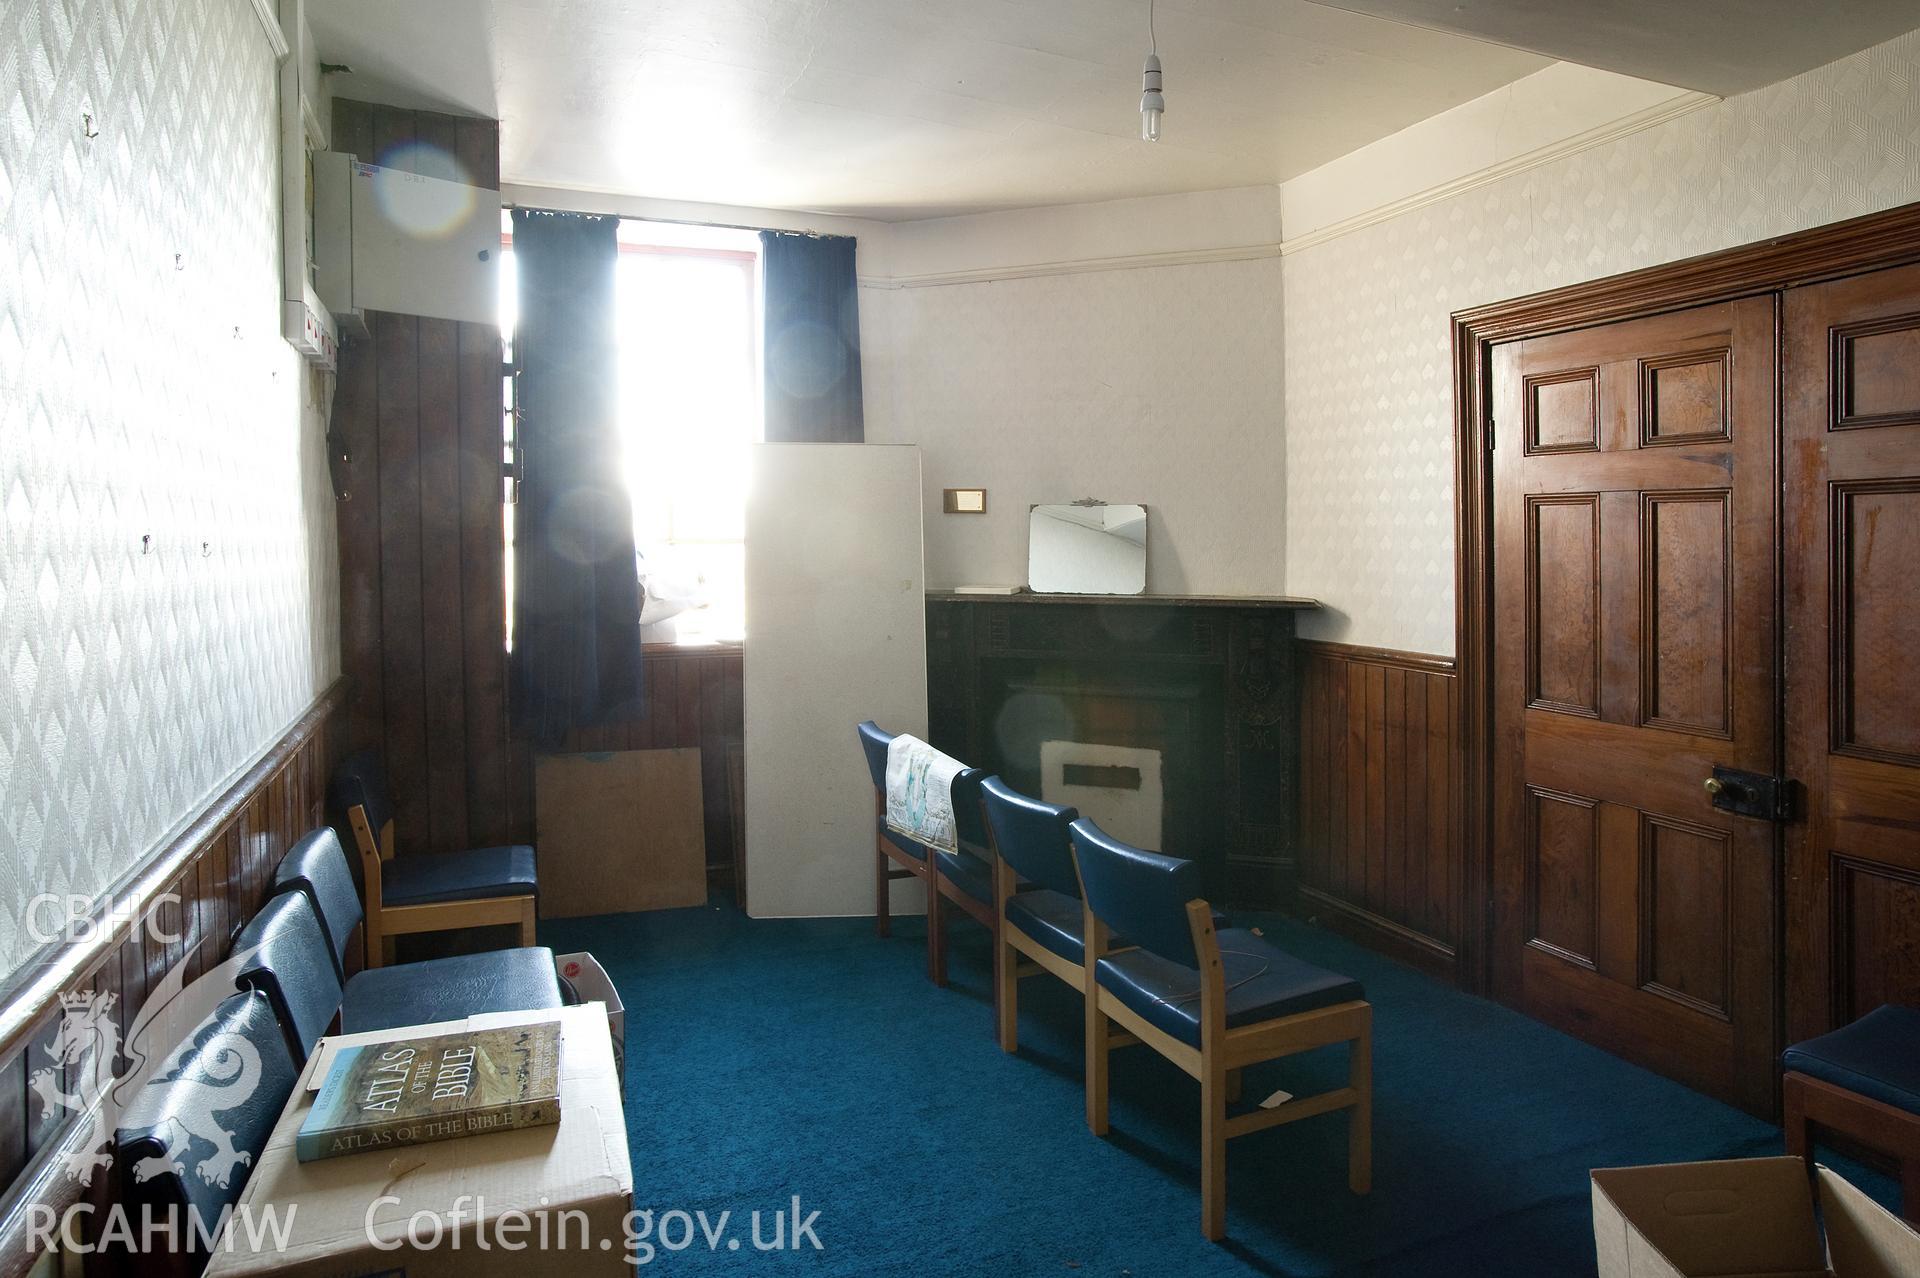 Hanbury Road baptist chapel, Bargoed, digital copy of a colour photograph showing former vestry used for worship 2010, received in the course of Emergency Recording case ref no RCS2/1/2247.